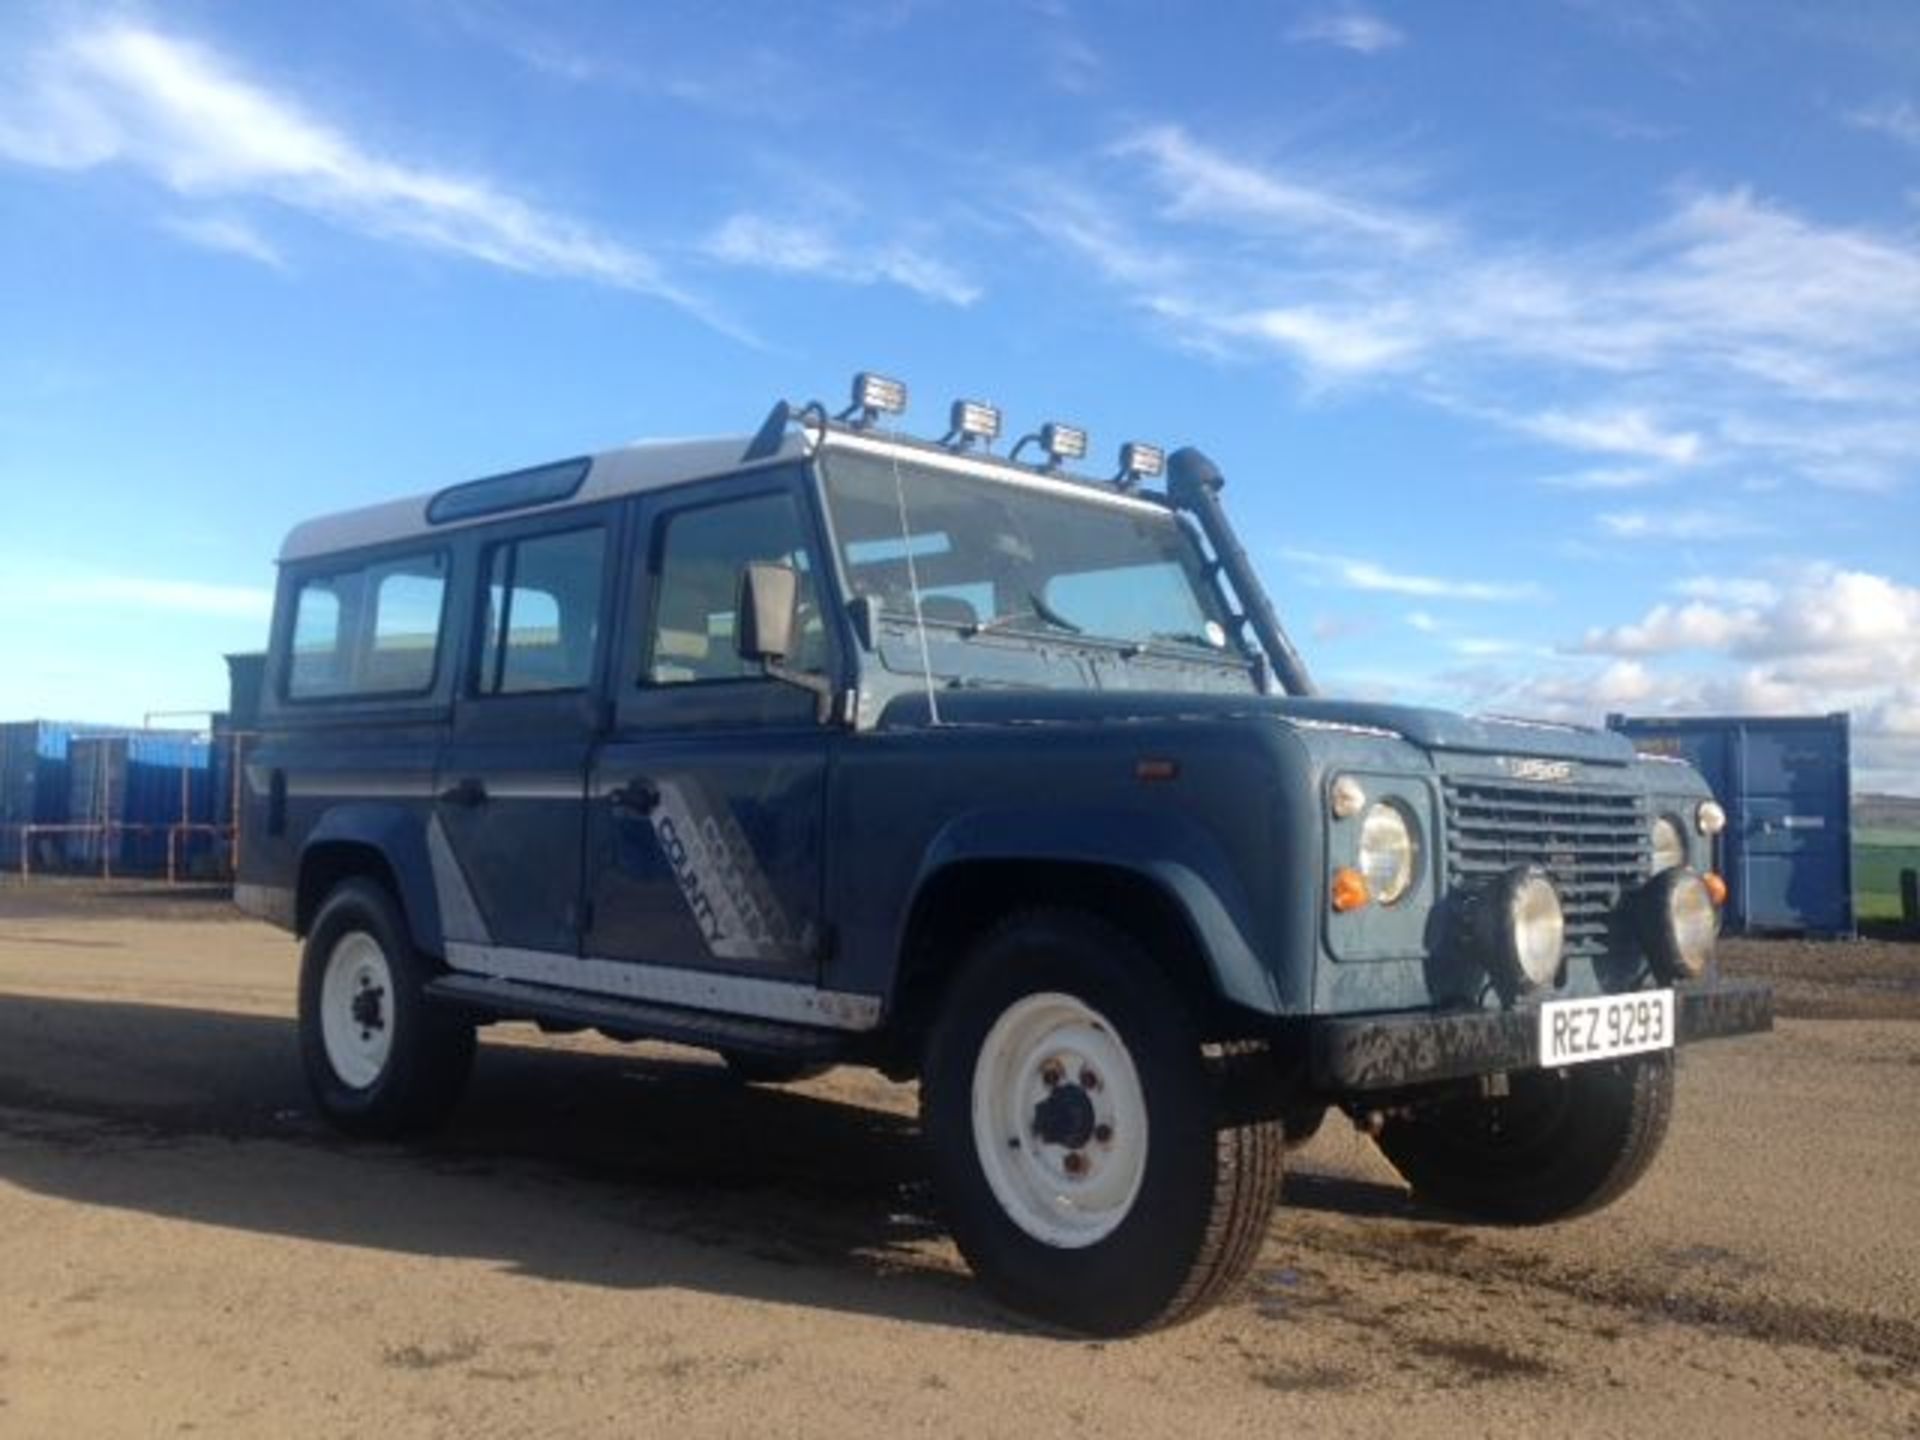 LAND ROVER 110 4C COUNTY D TURBO - 2495cc - Image 4 of 8